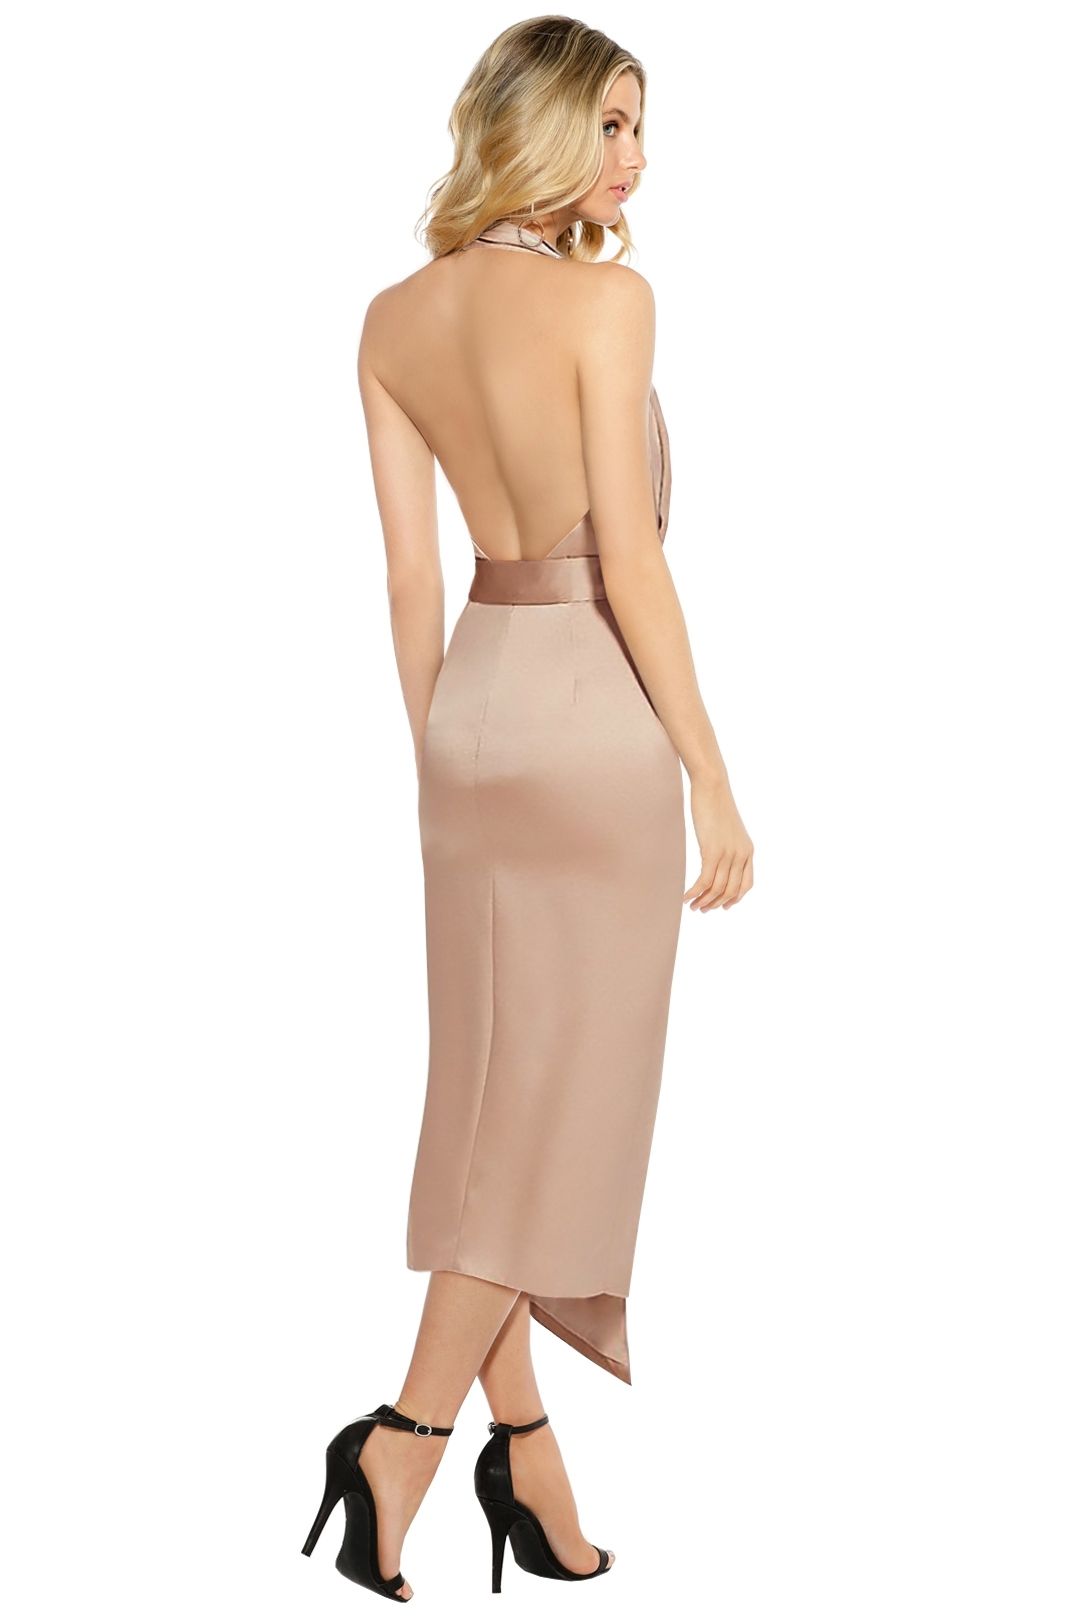 Misha Collection - Carrie Dress - Nude - Back